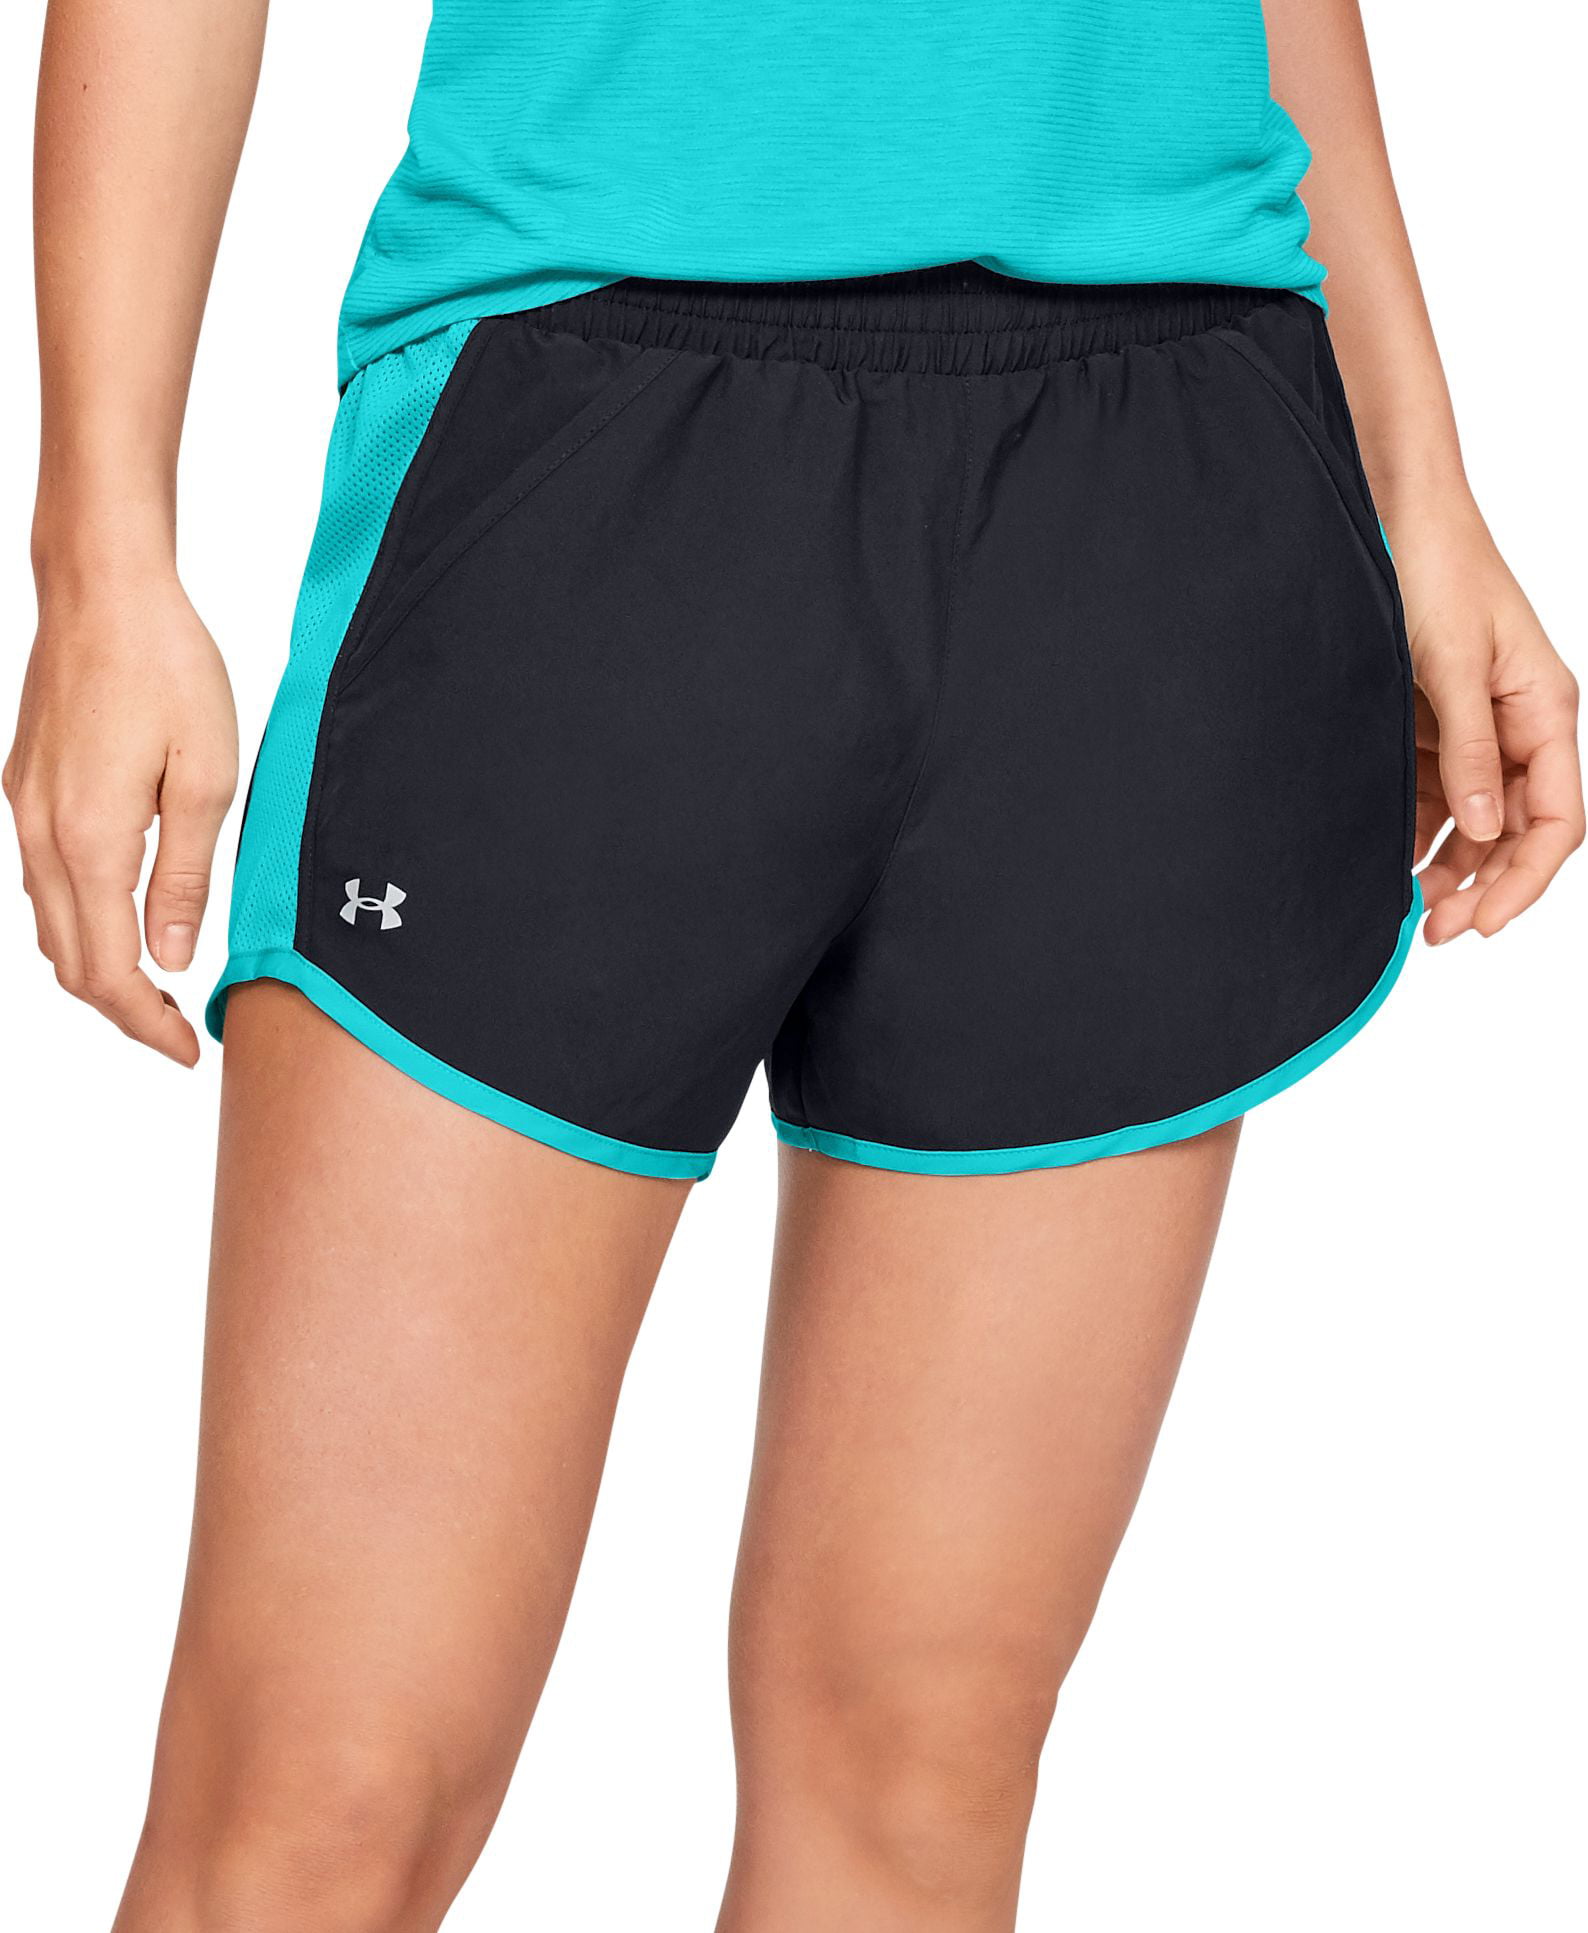 Under Armour Women's Fly-By Running Shorts